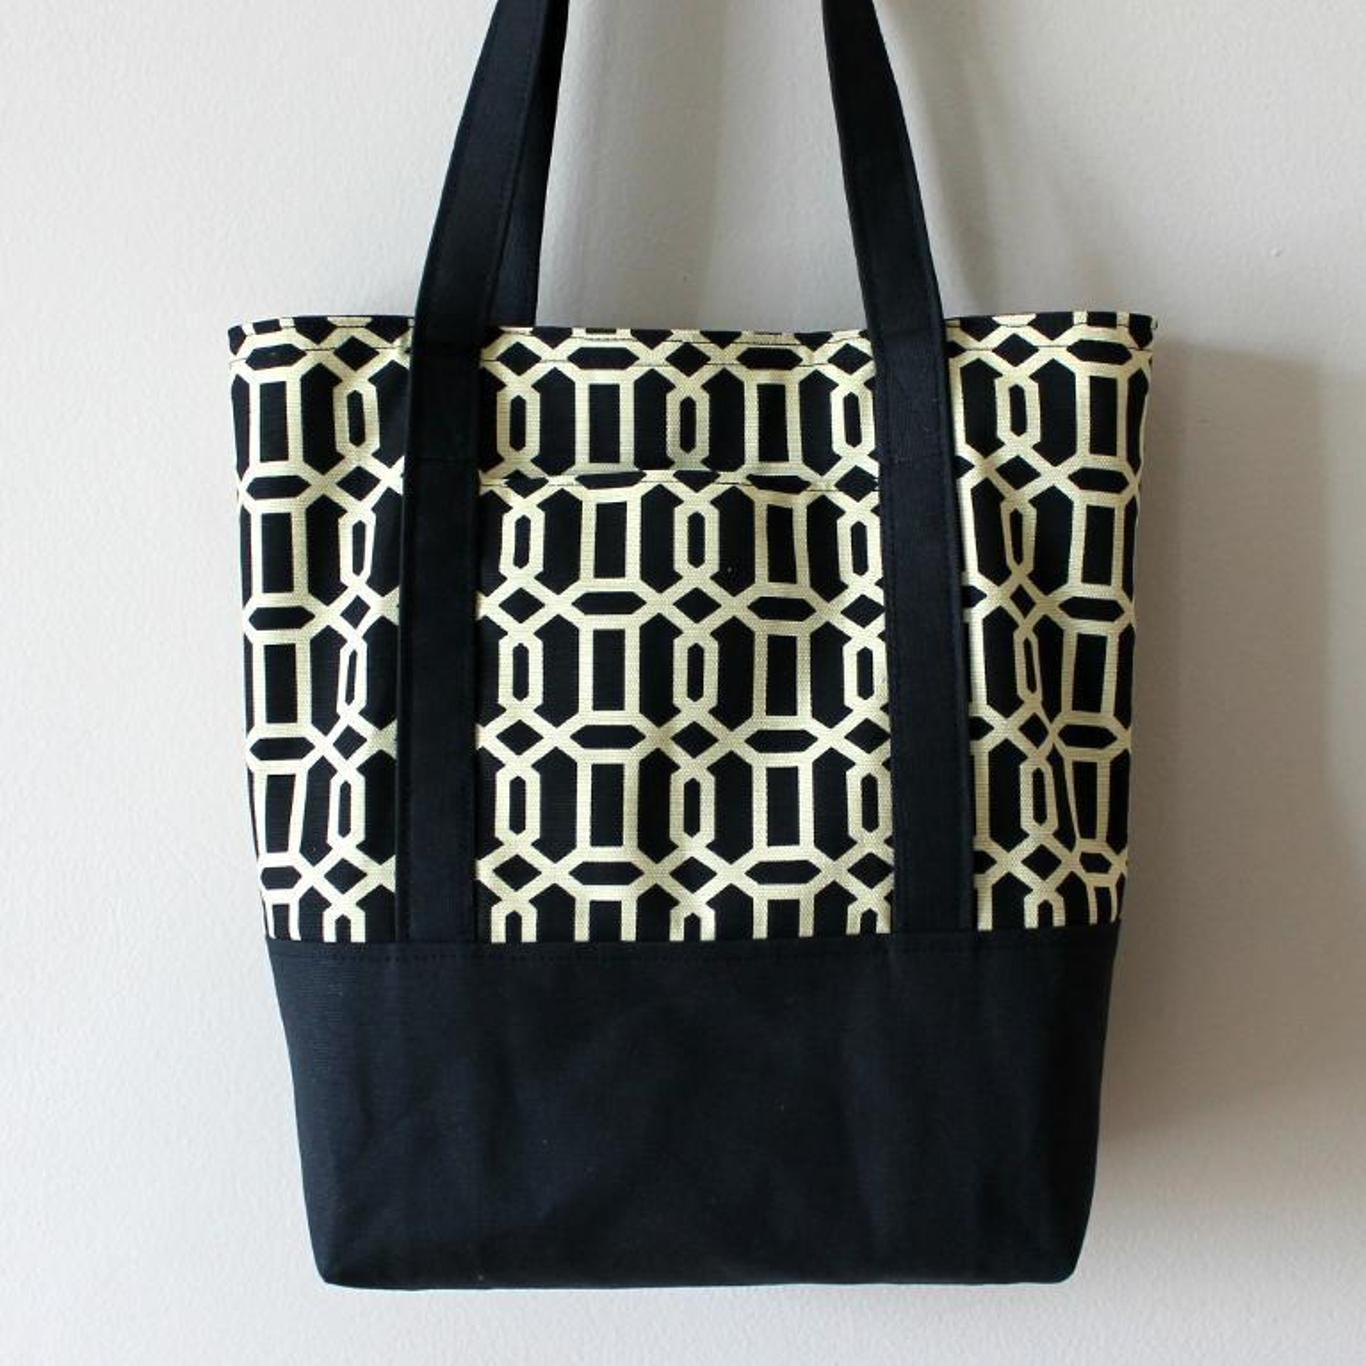 Grocery Bag Sewing Pattern Free - Fabric Michellepatterns | Bodendwasuct